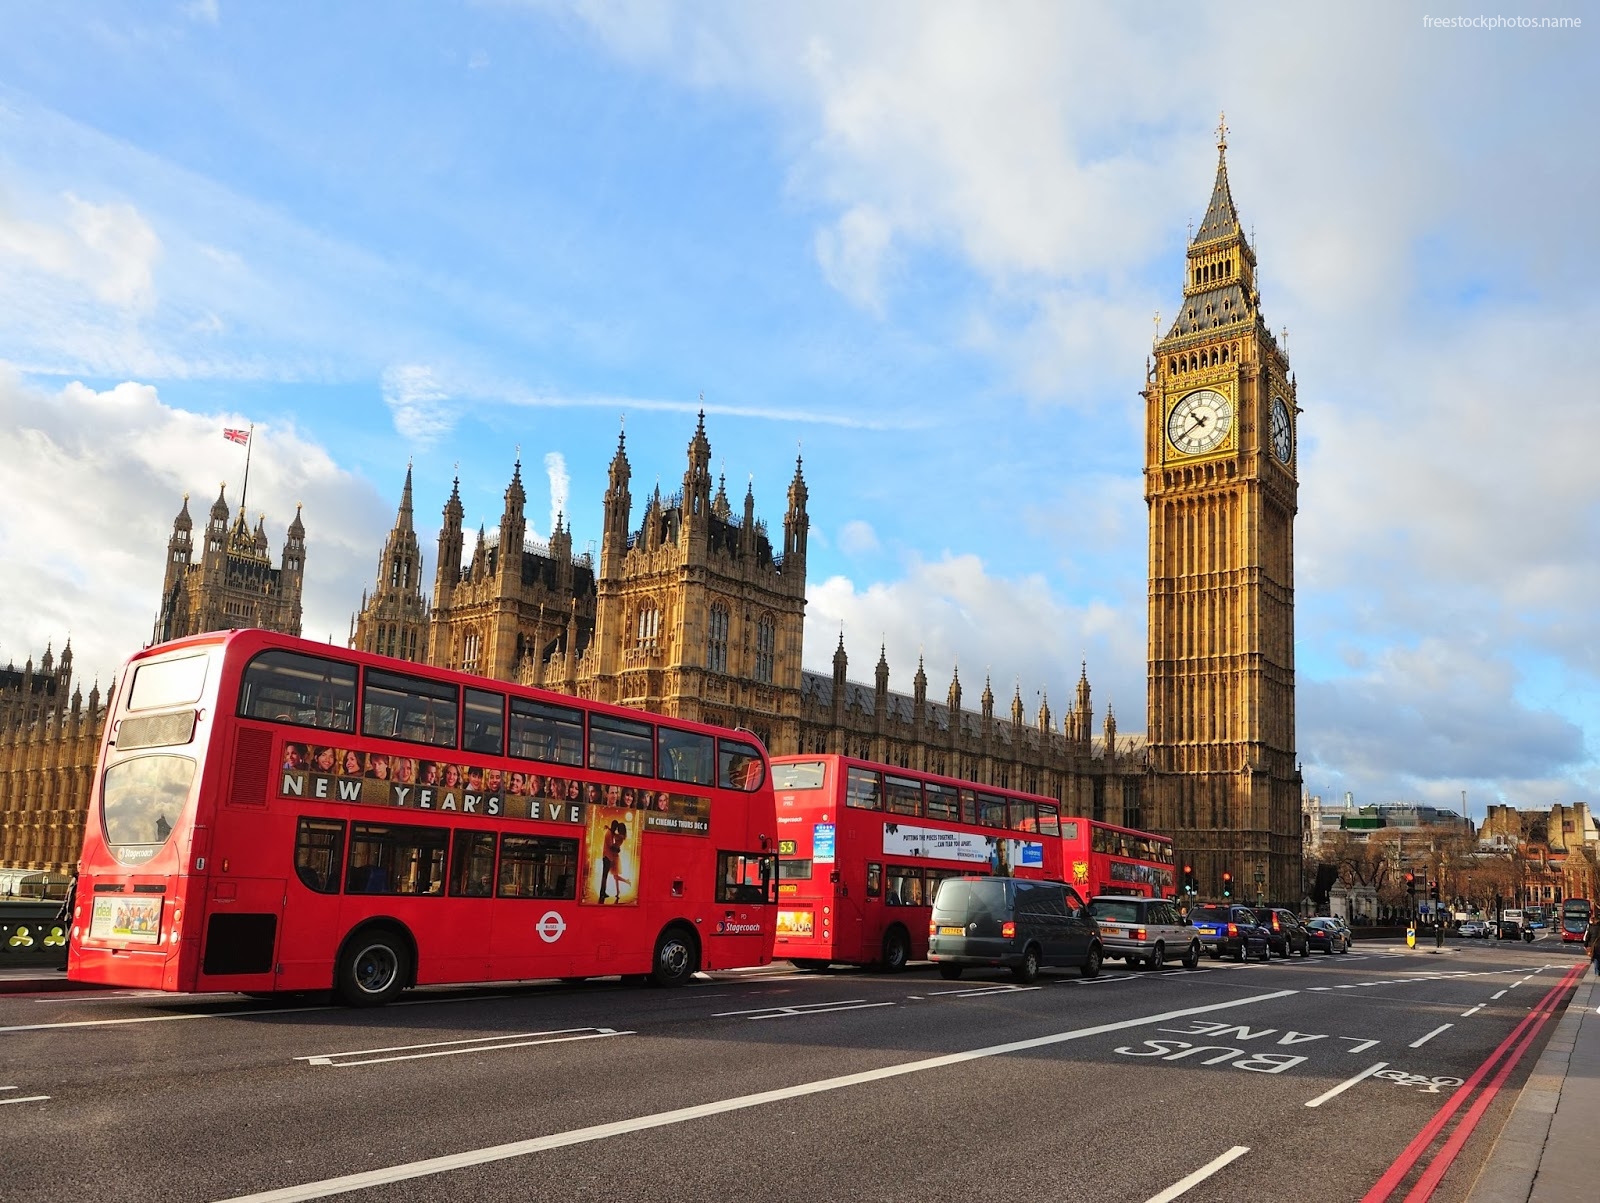 tourist-places-in-london-4028